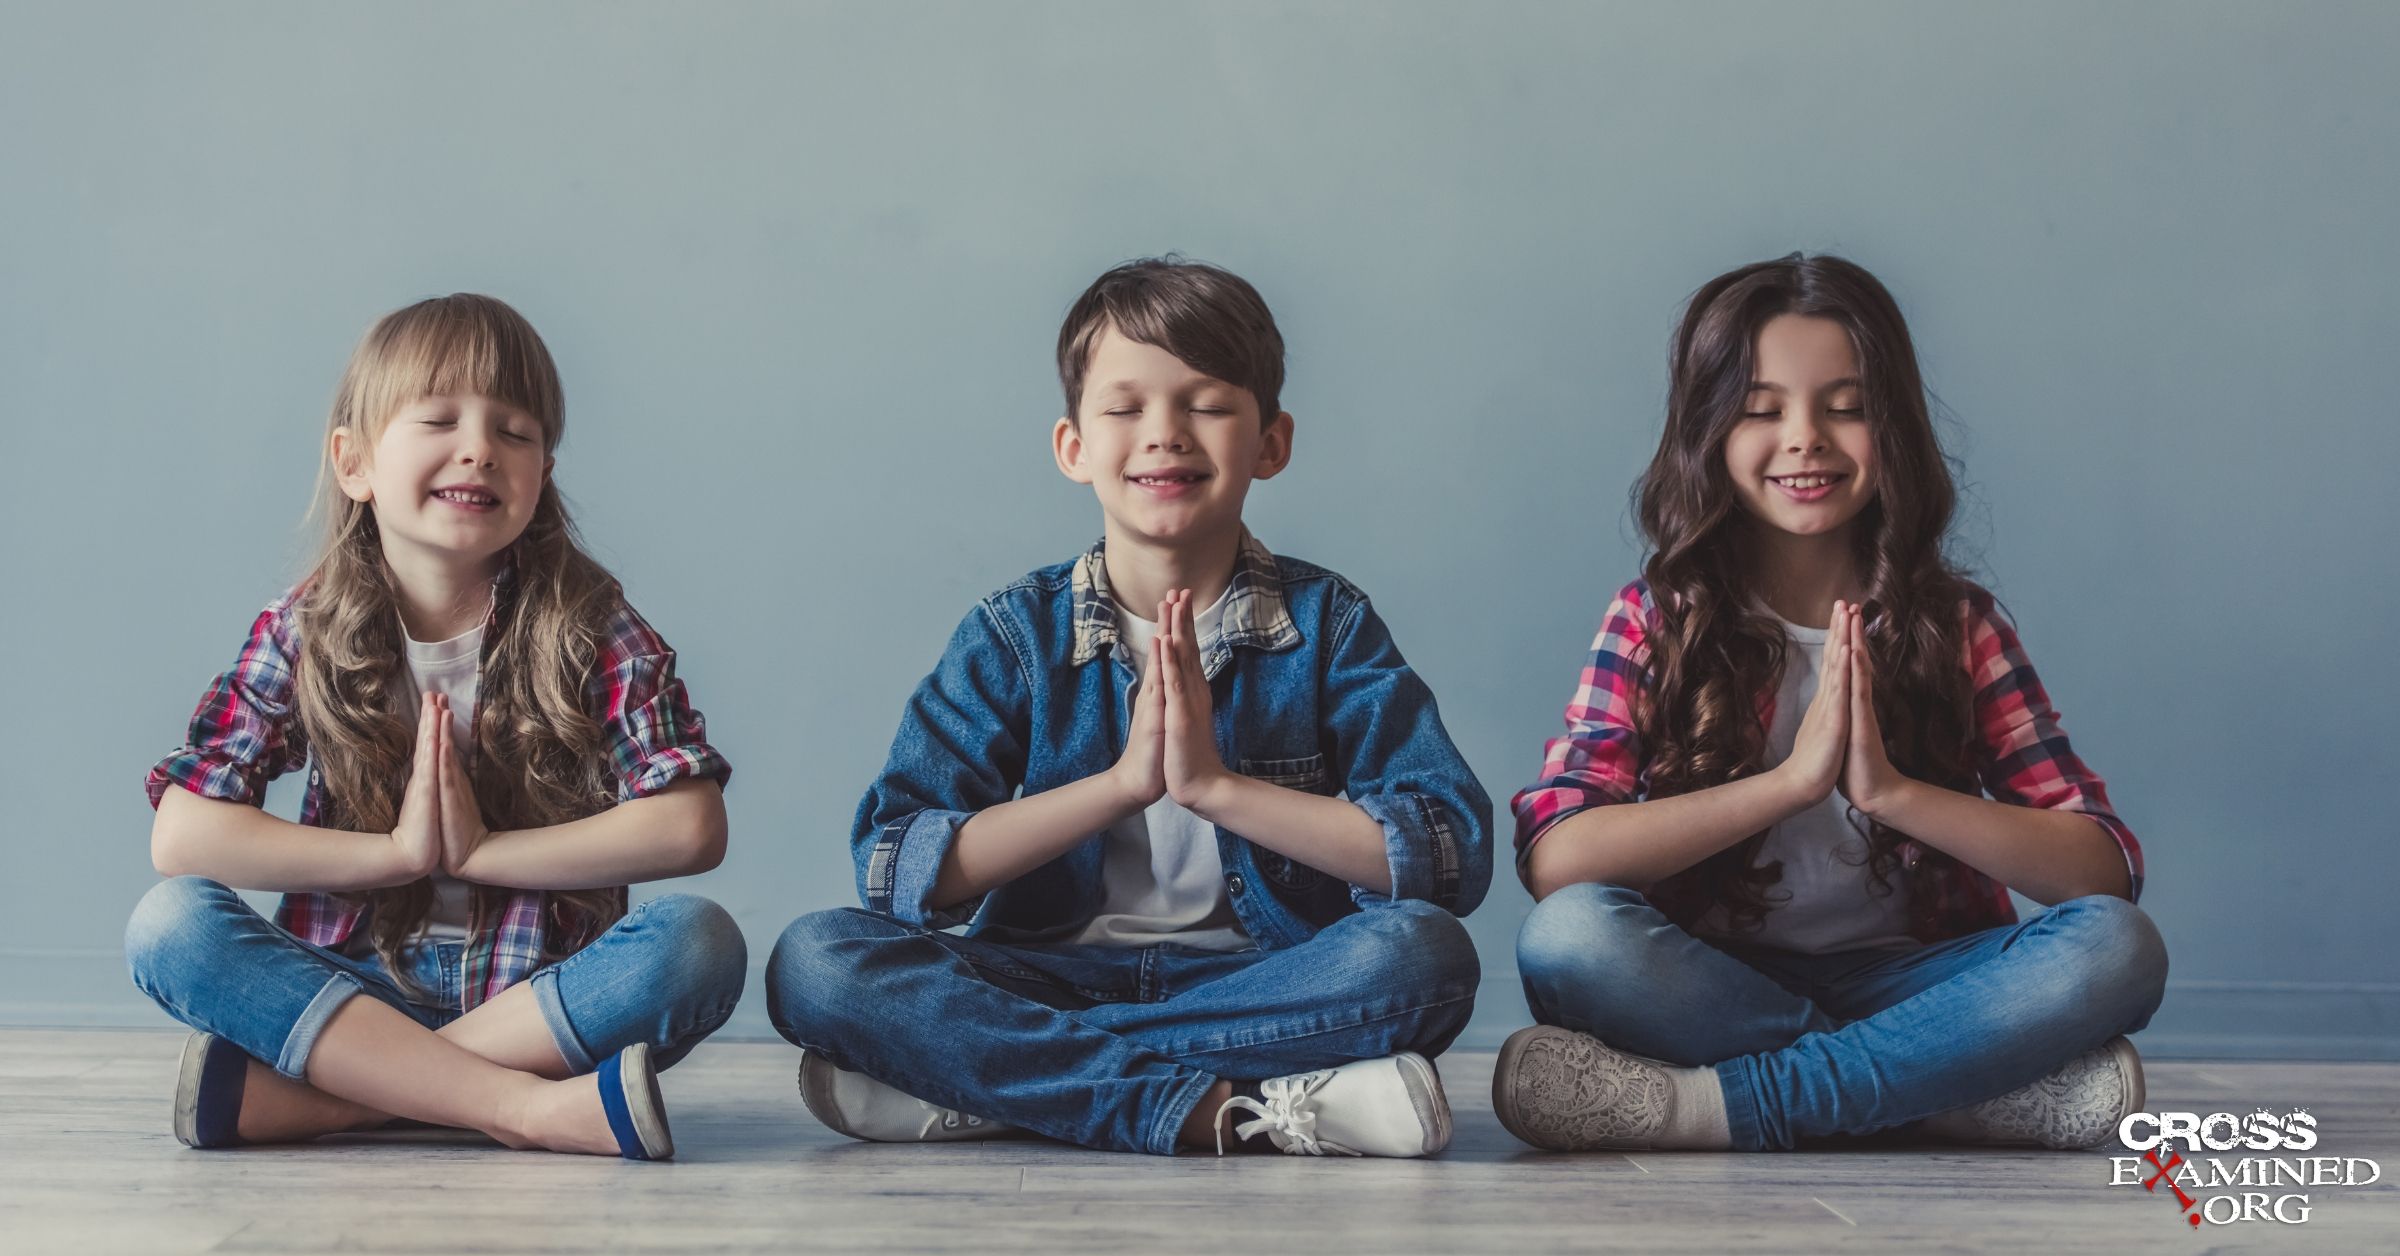 Should You Raise Your Kids in a Christian Bubble